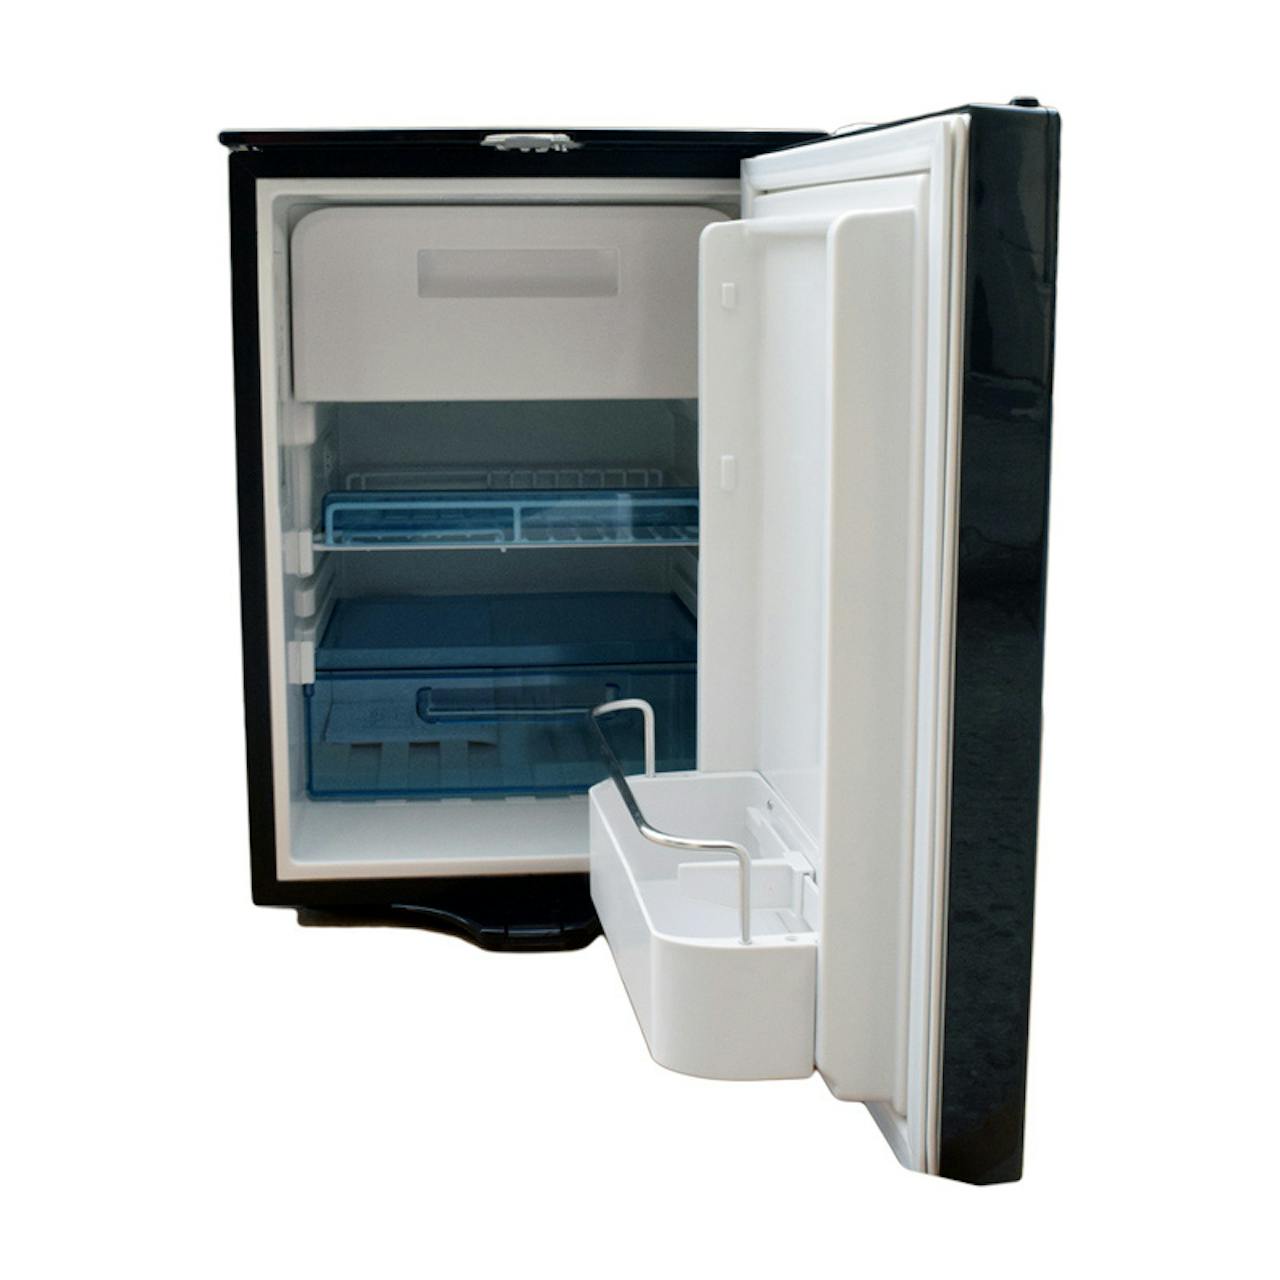 Truck Fridge Built-In 12-Volt DC Refrigerator With Freezer CRX-50 By Dometic